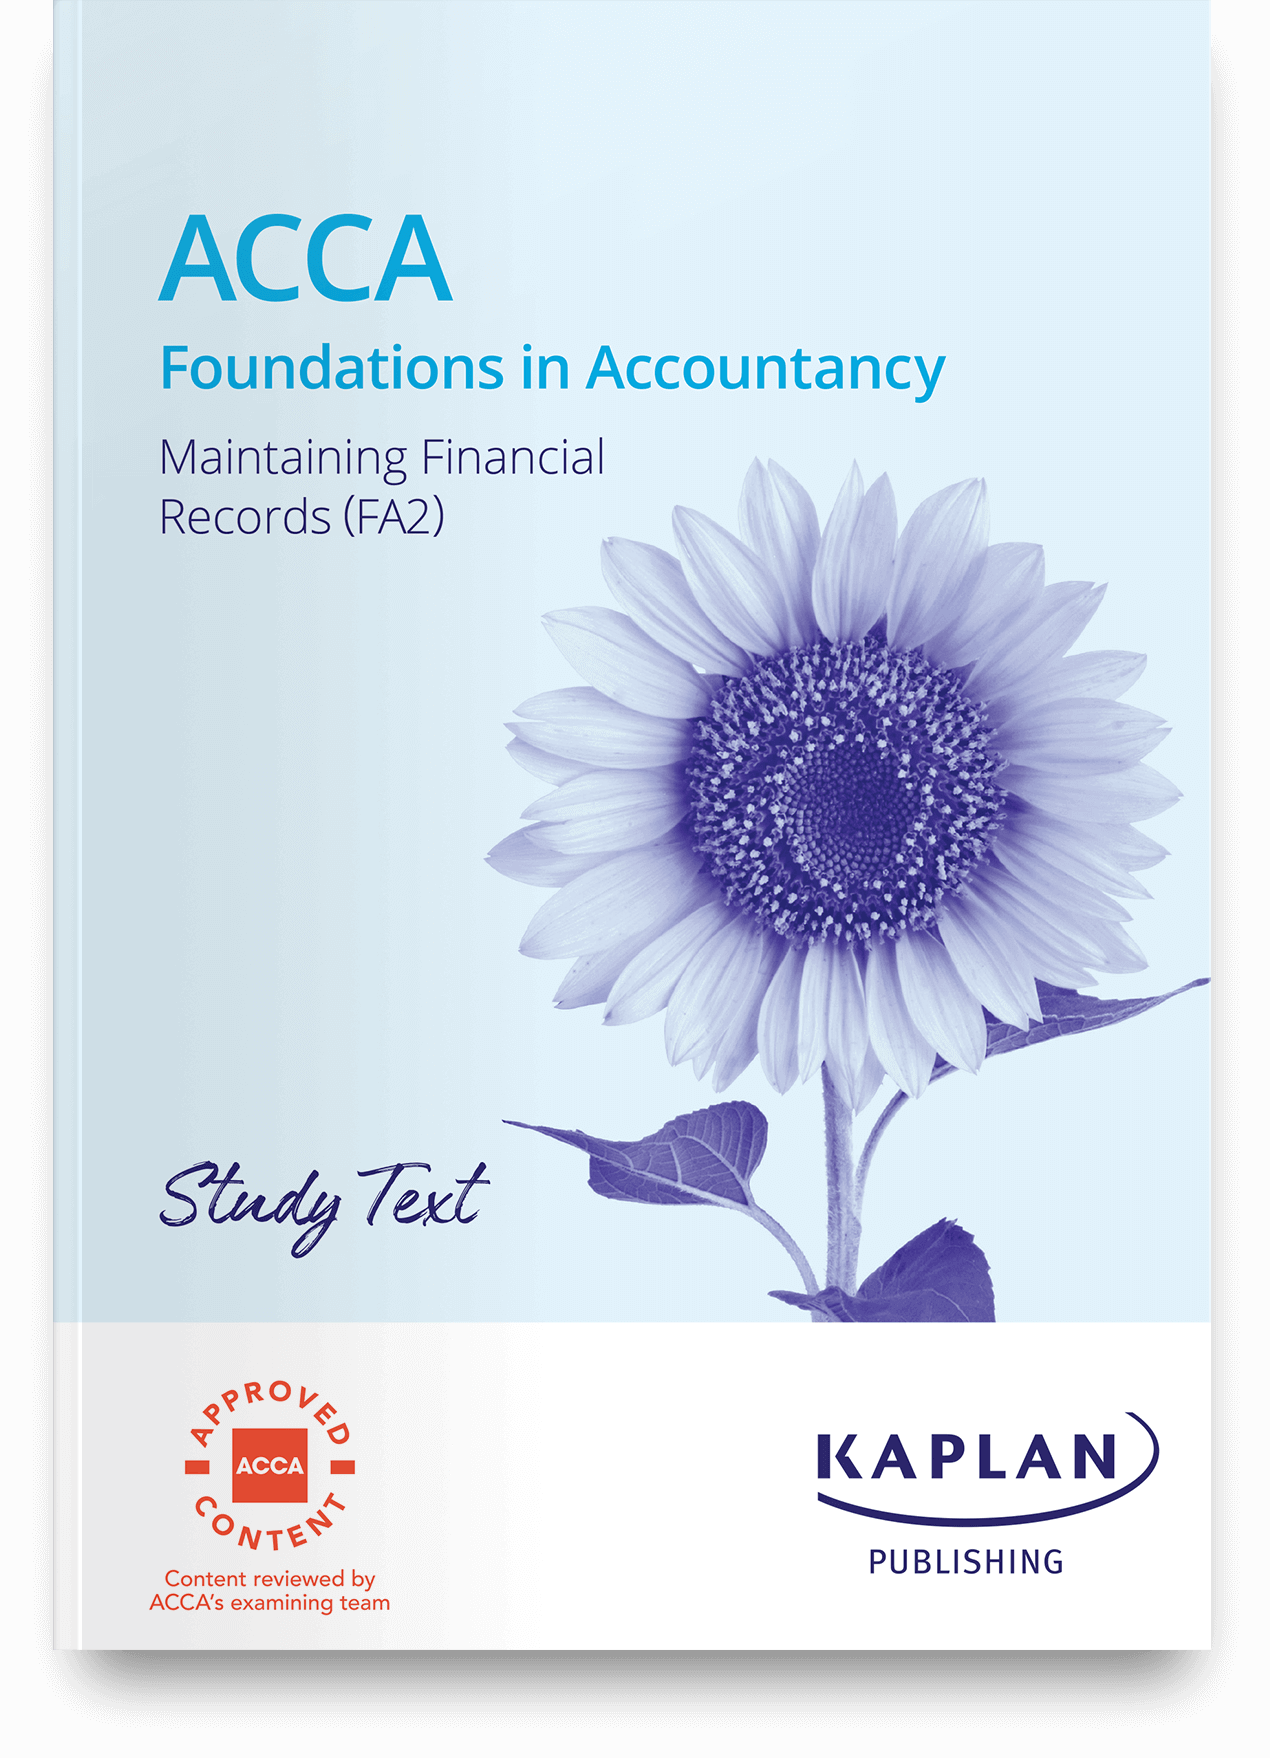 ACCA Foundations - Maintaining Financial Records (FA2) - Study Text